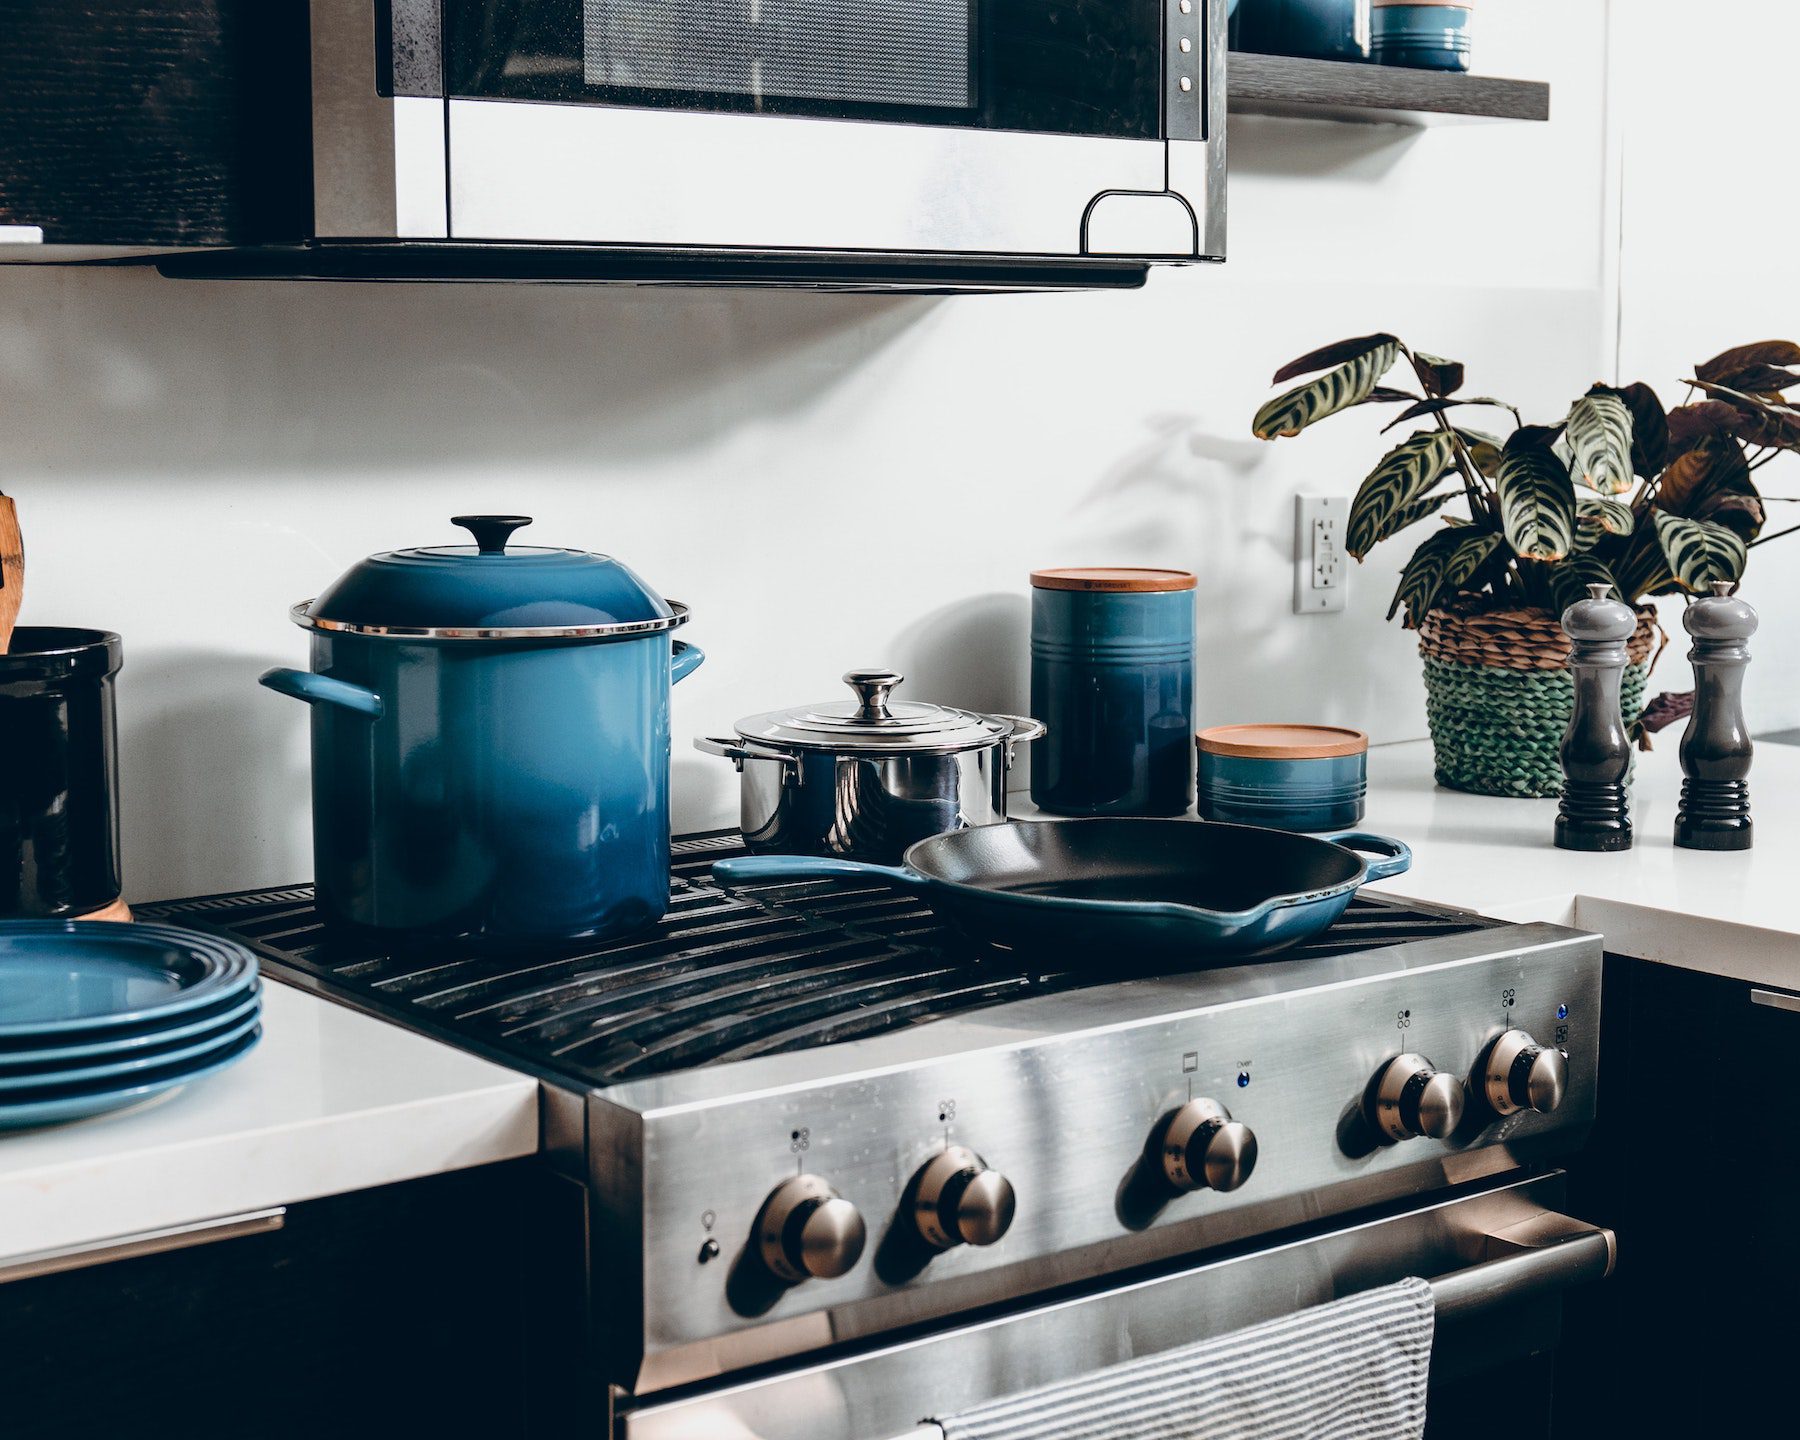 A clean modern kitchen with blue ombre cookware.